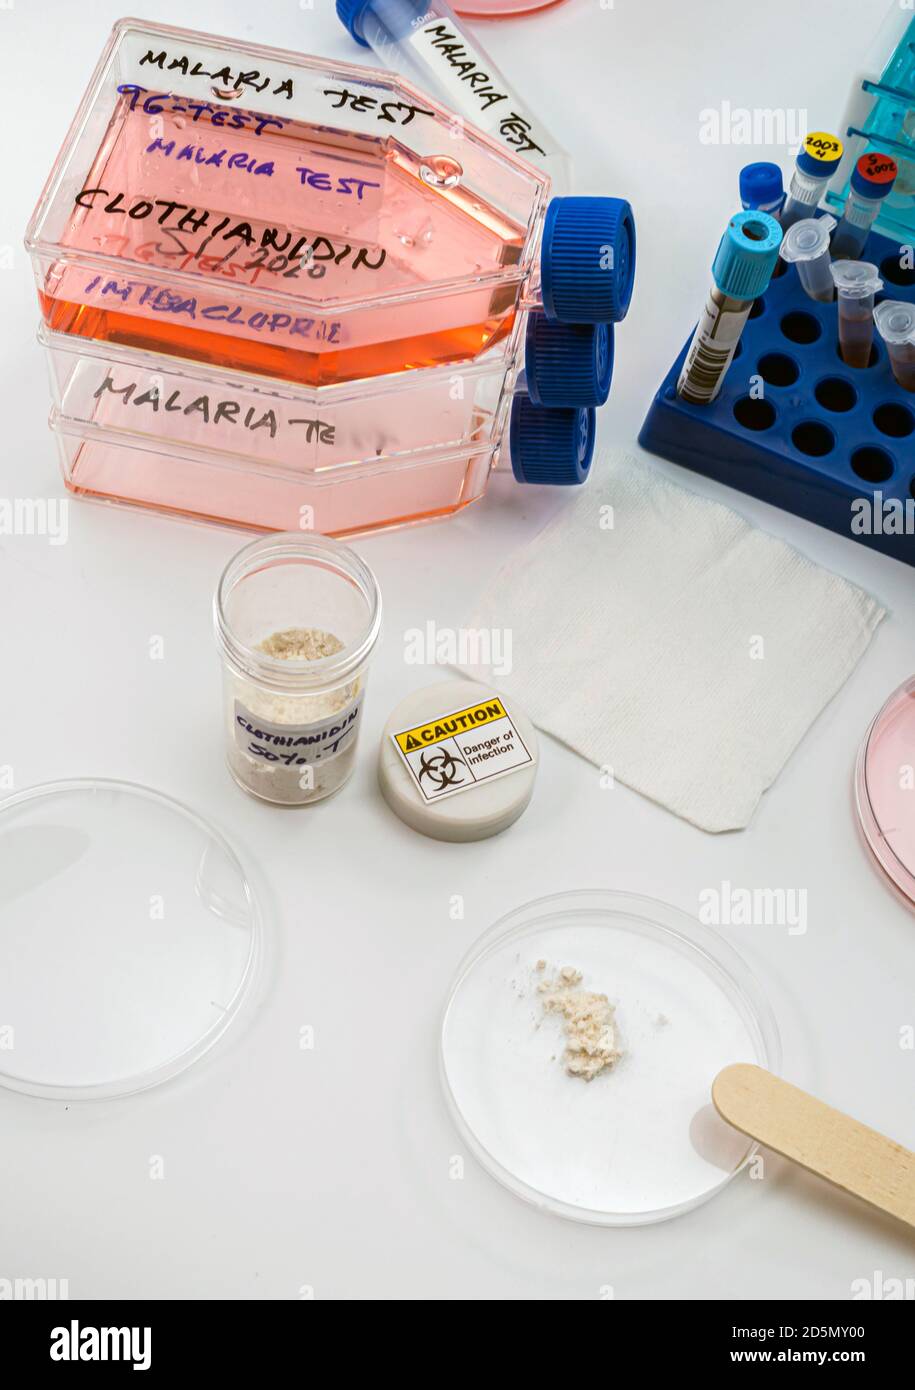 Laboratory research on the insecticide clothianidin, cause of malaria disease through The Anopheles family of malarial mosquitoes, conceptual image Stock Photo